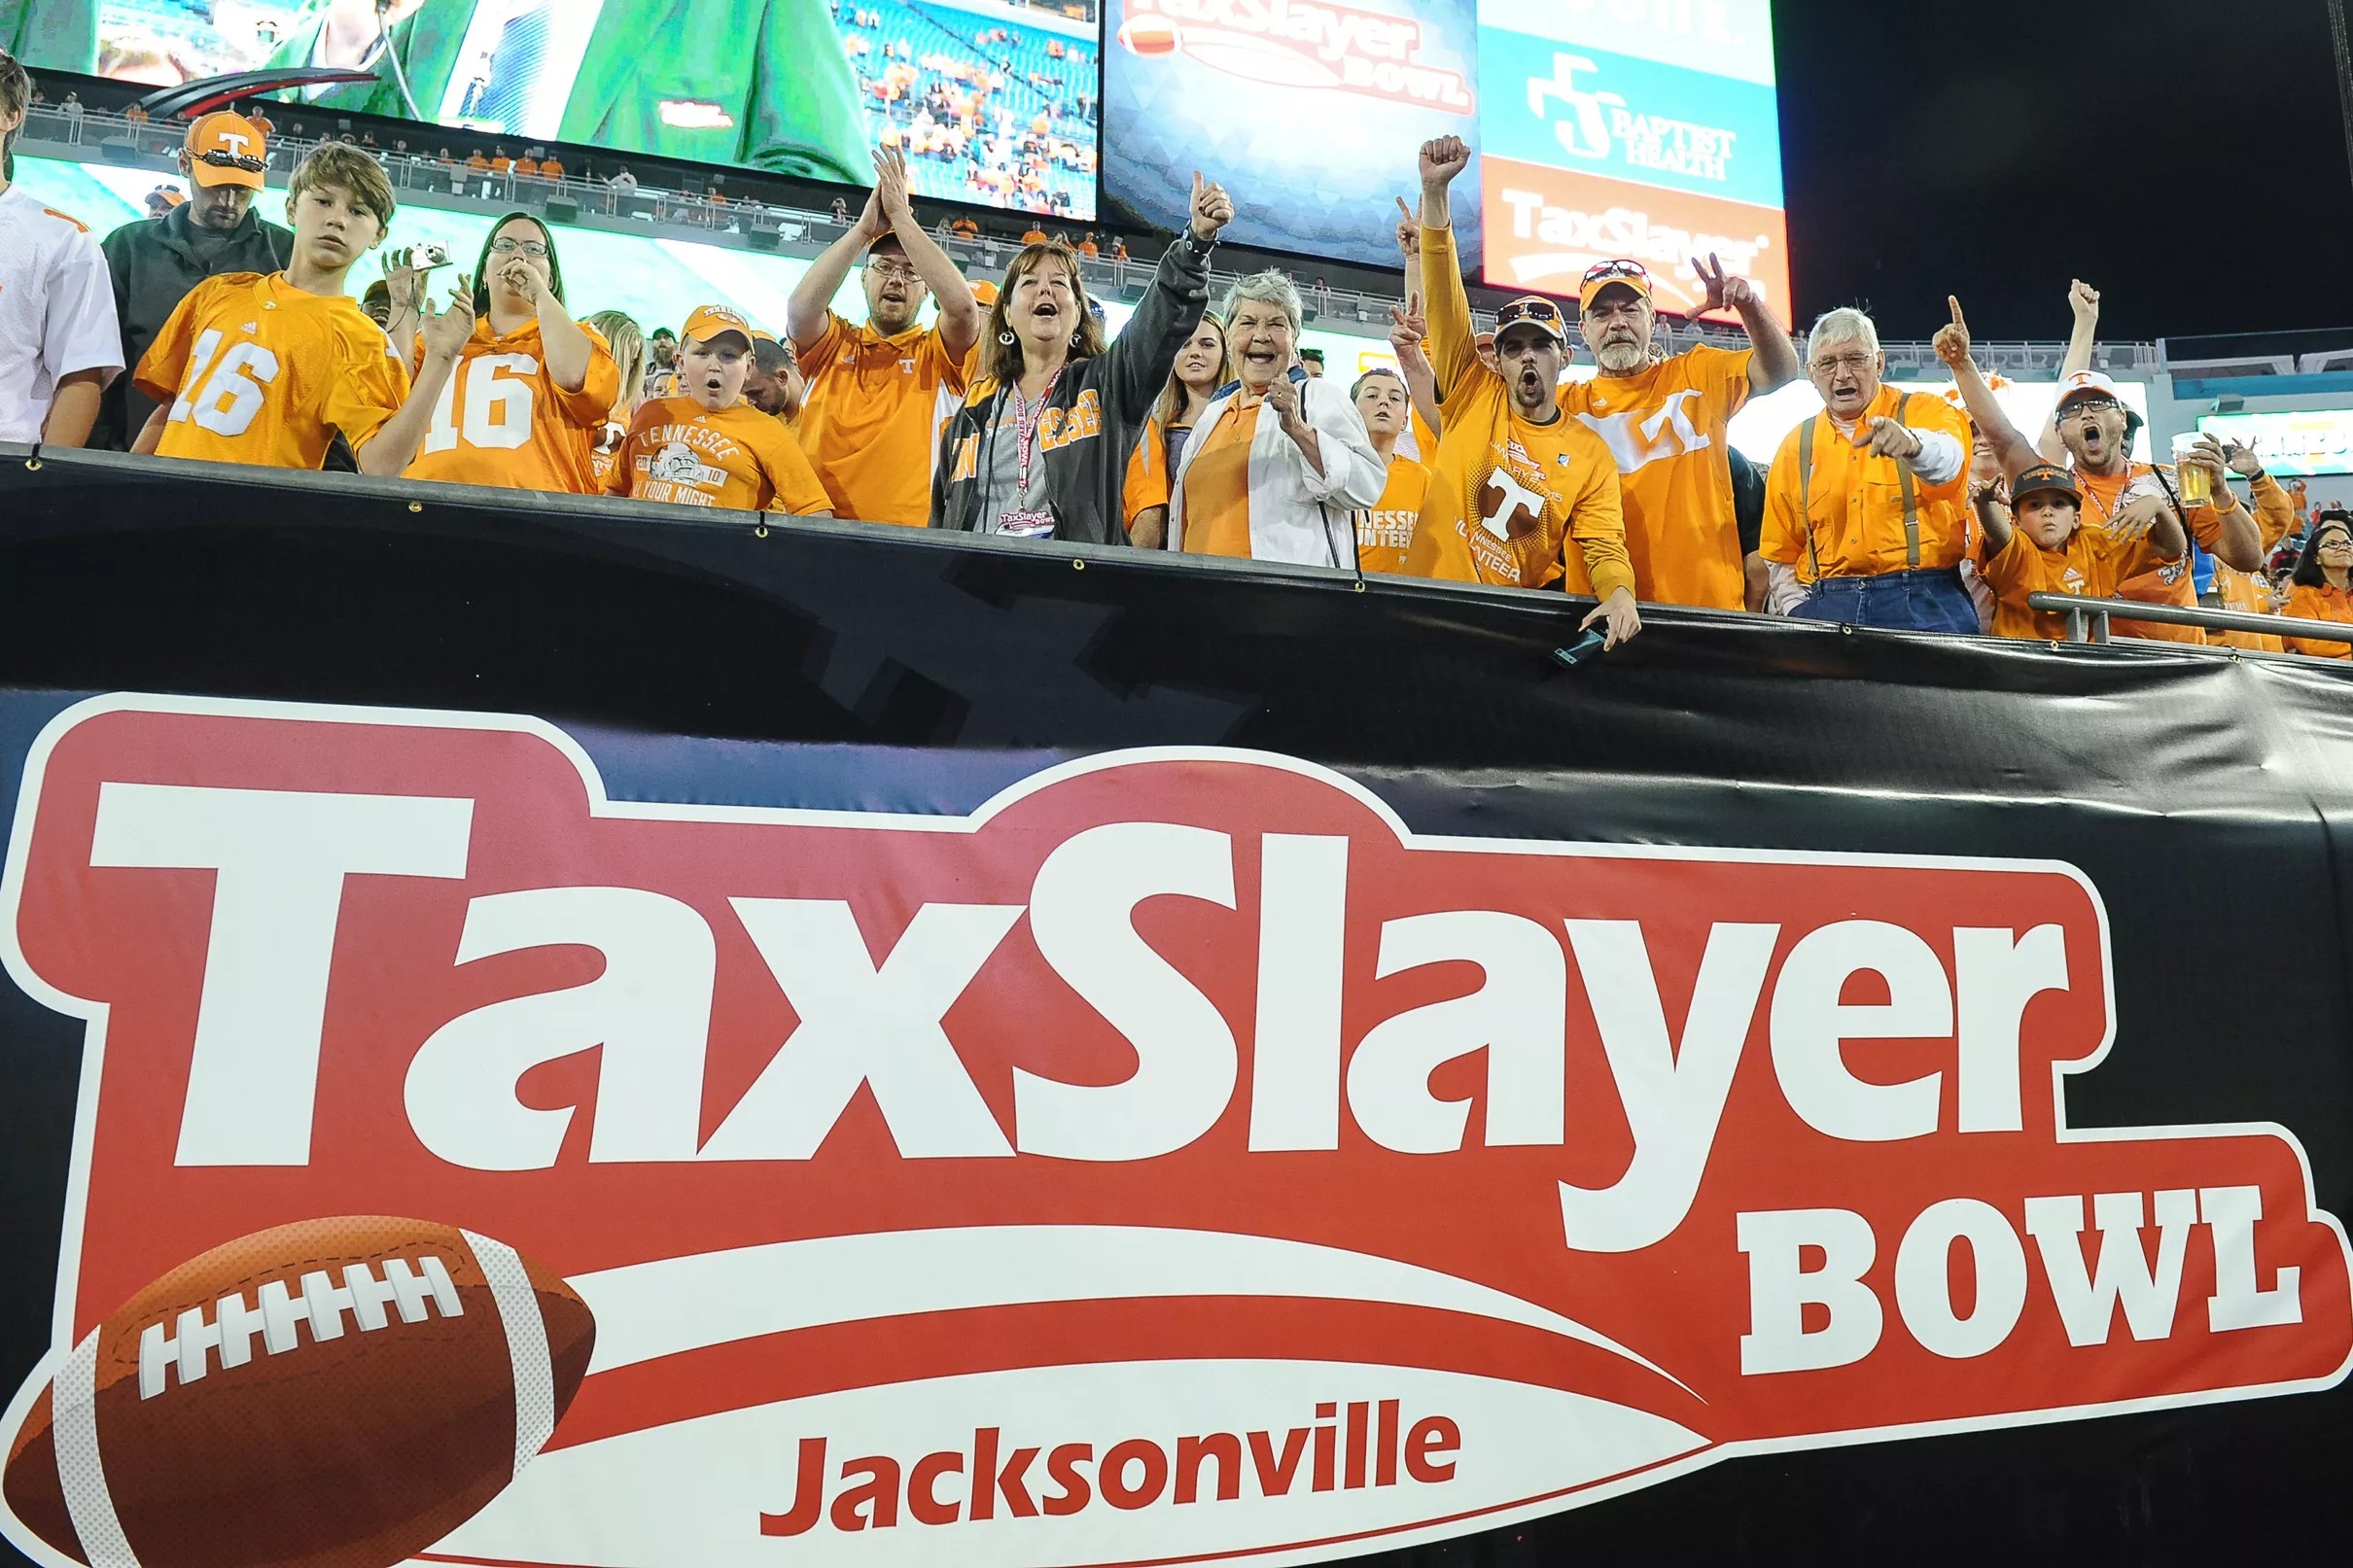 Watch Bowl prep continues as Vols land in Jacksonville